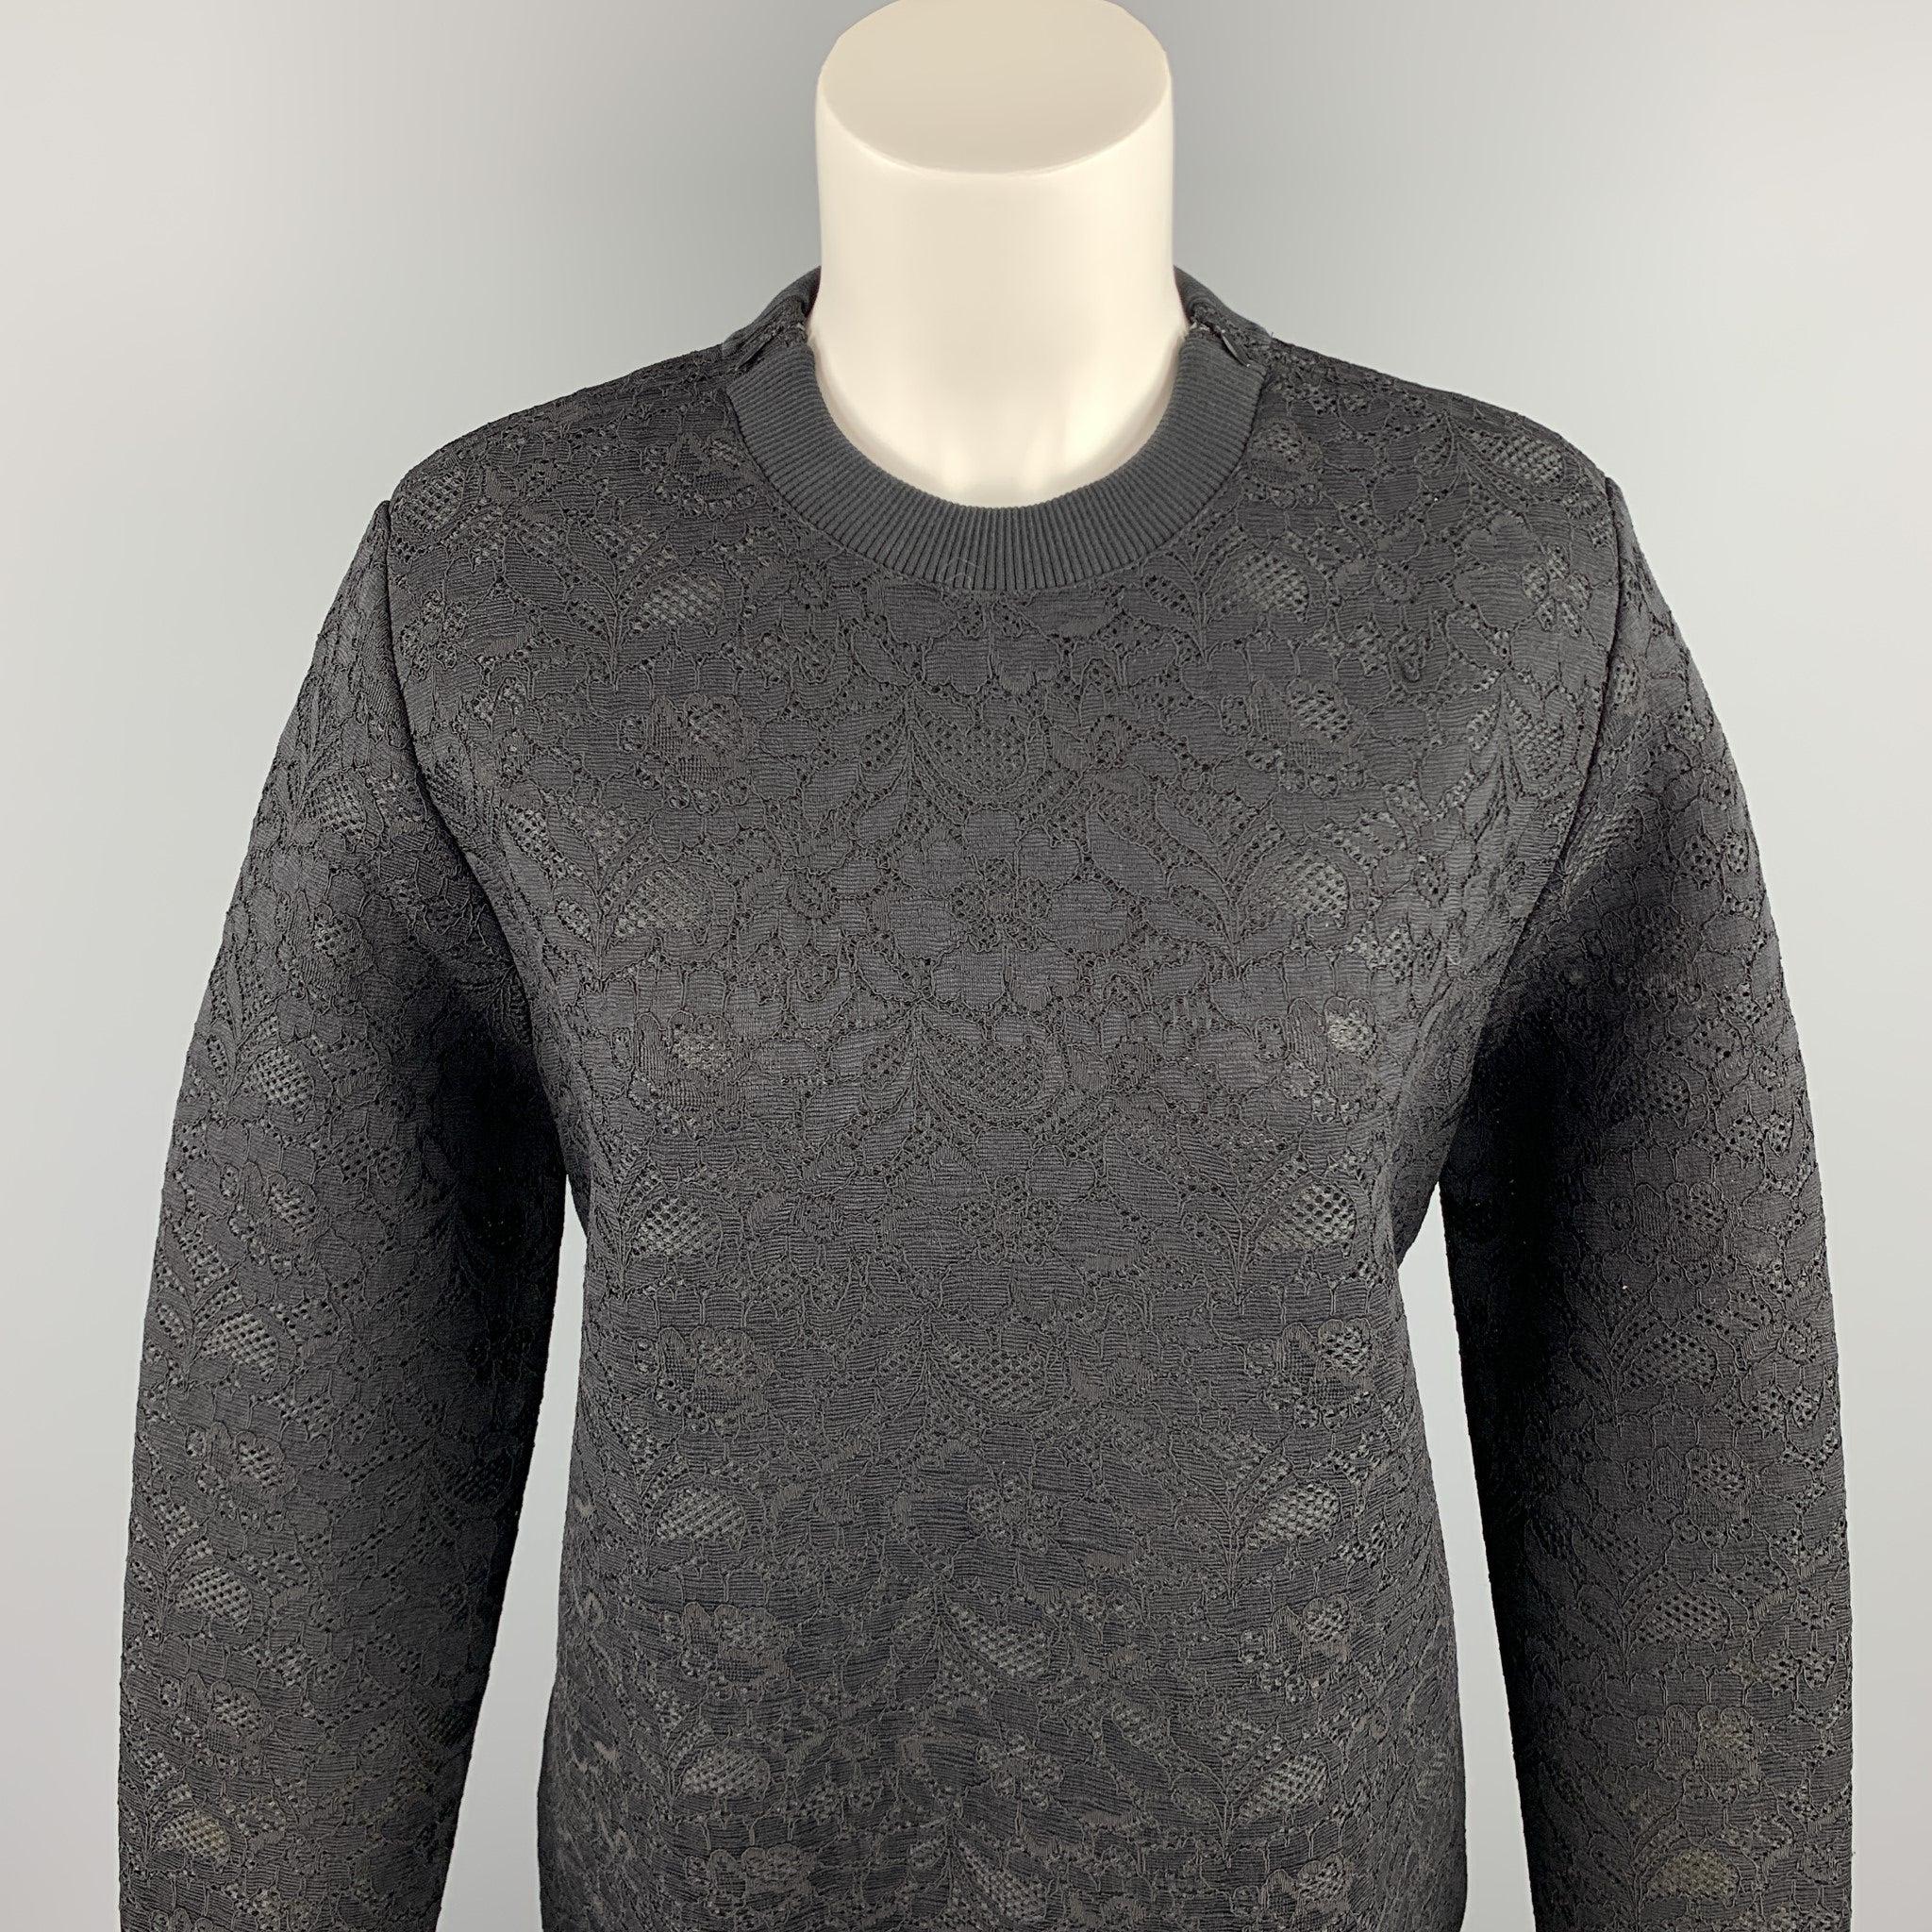 GIVENCHY pullover comes in a black lace polyester blend featuring shoulder zipper details and a crew-neck. Made in Italy.New With Tags. 

Marked:   IT 36 

Measurements: 
 
Shoulder: 16 inches 
Bust: 40 inches 
Sleeve: 27.5 inches 
Length: 26 inches